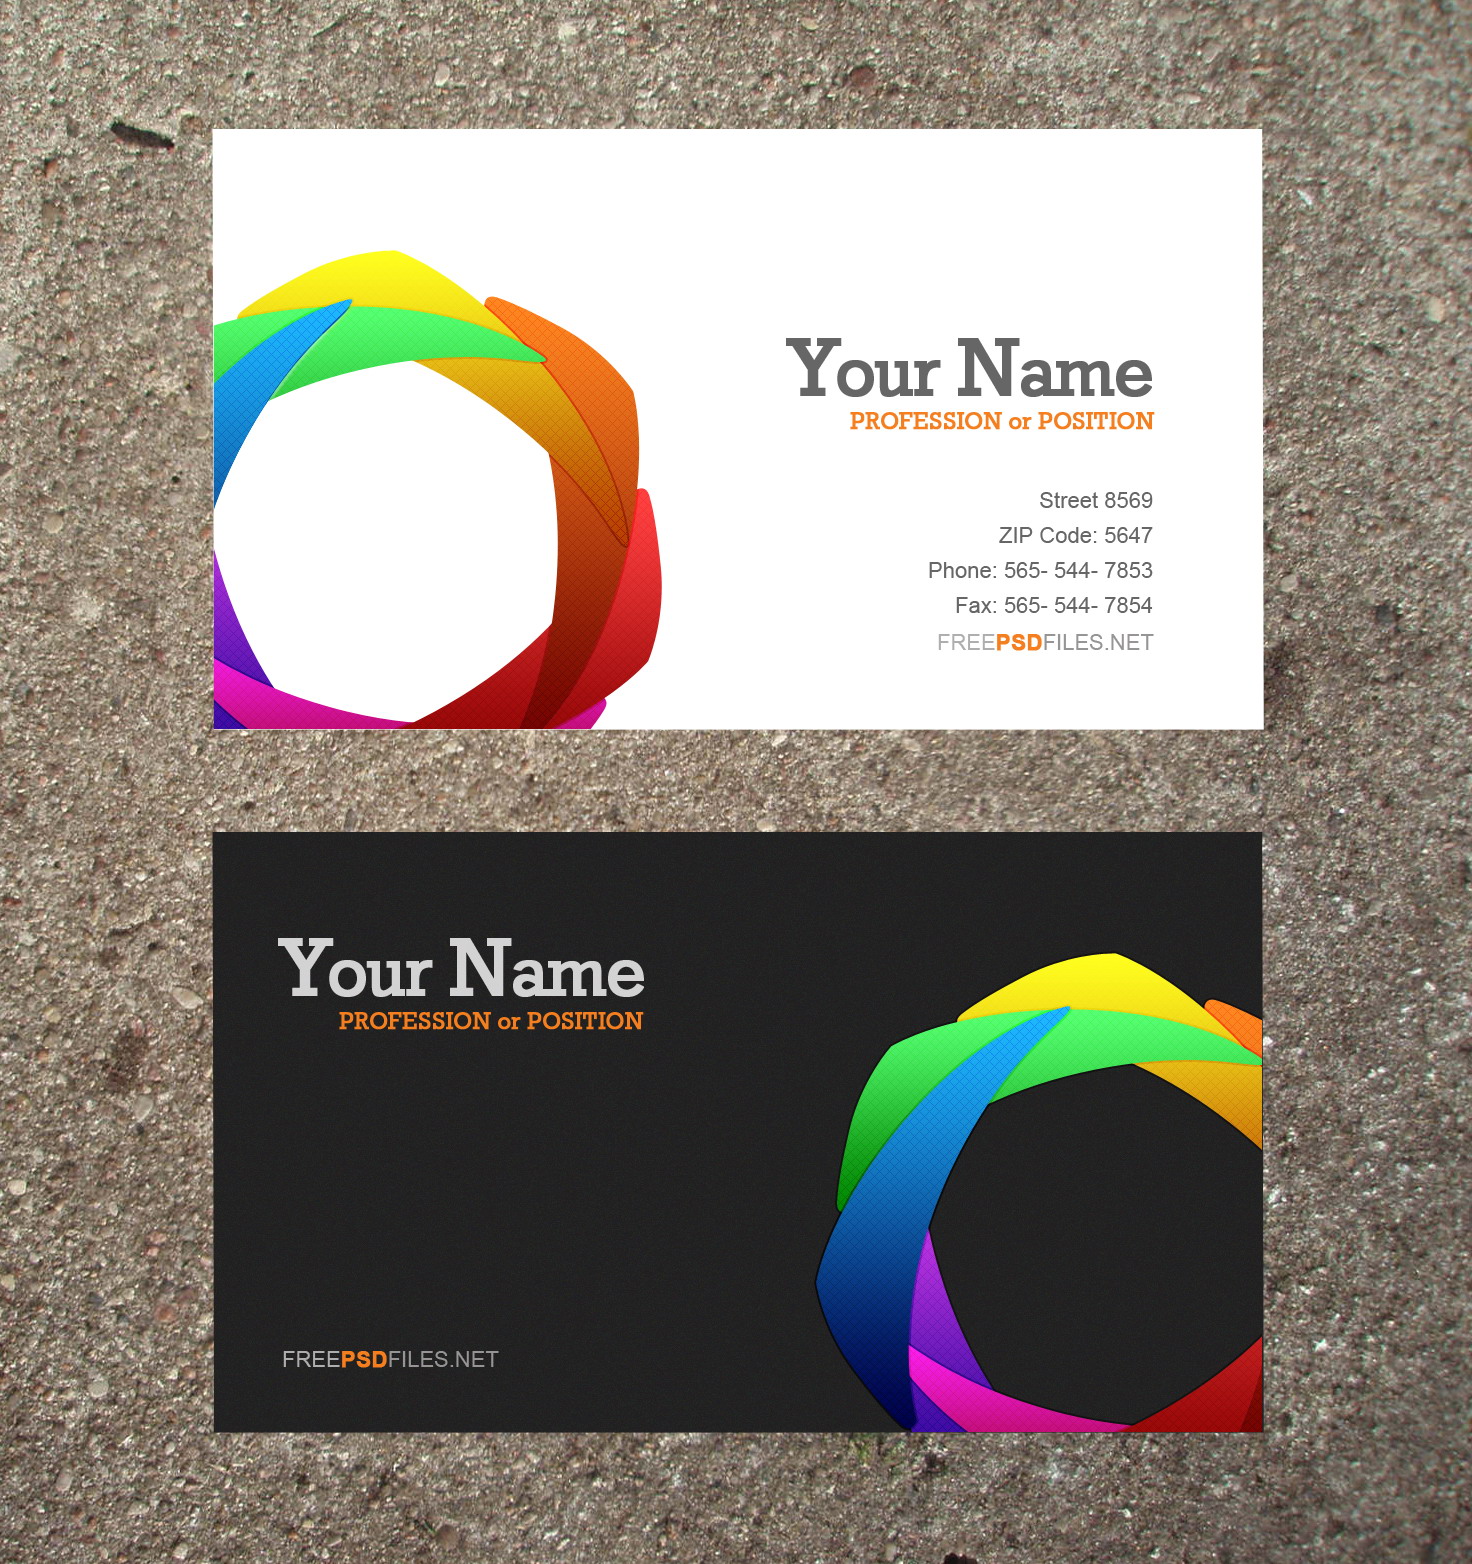 Free Printable Business Card With A Rose And Flower